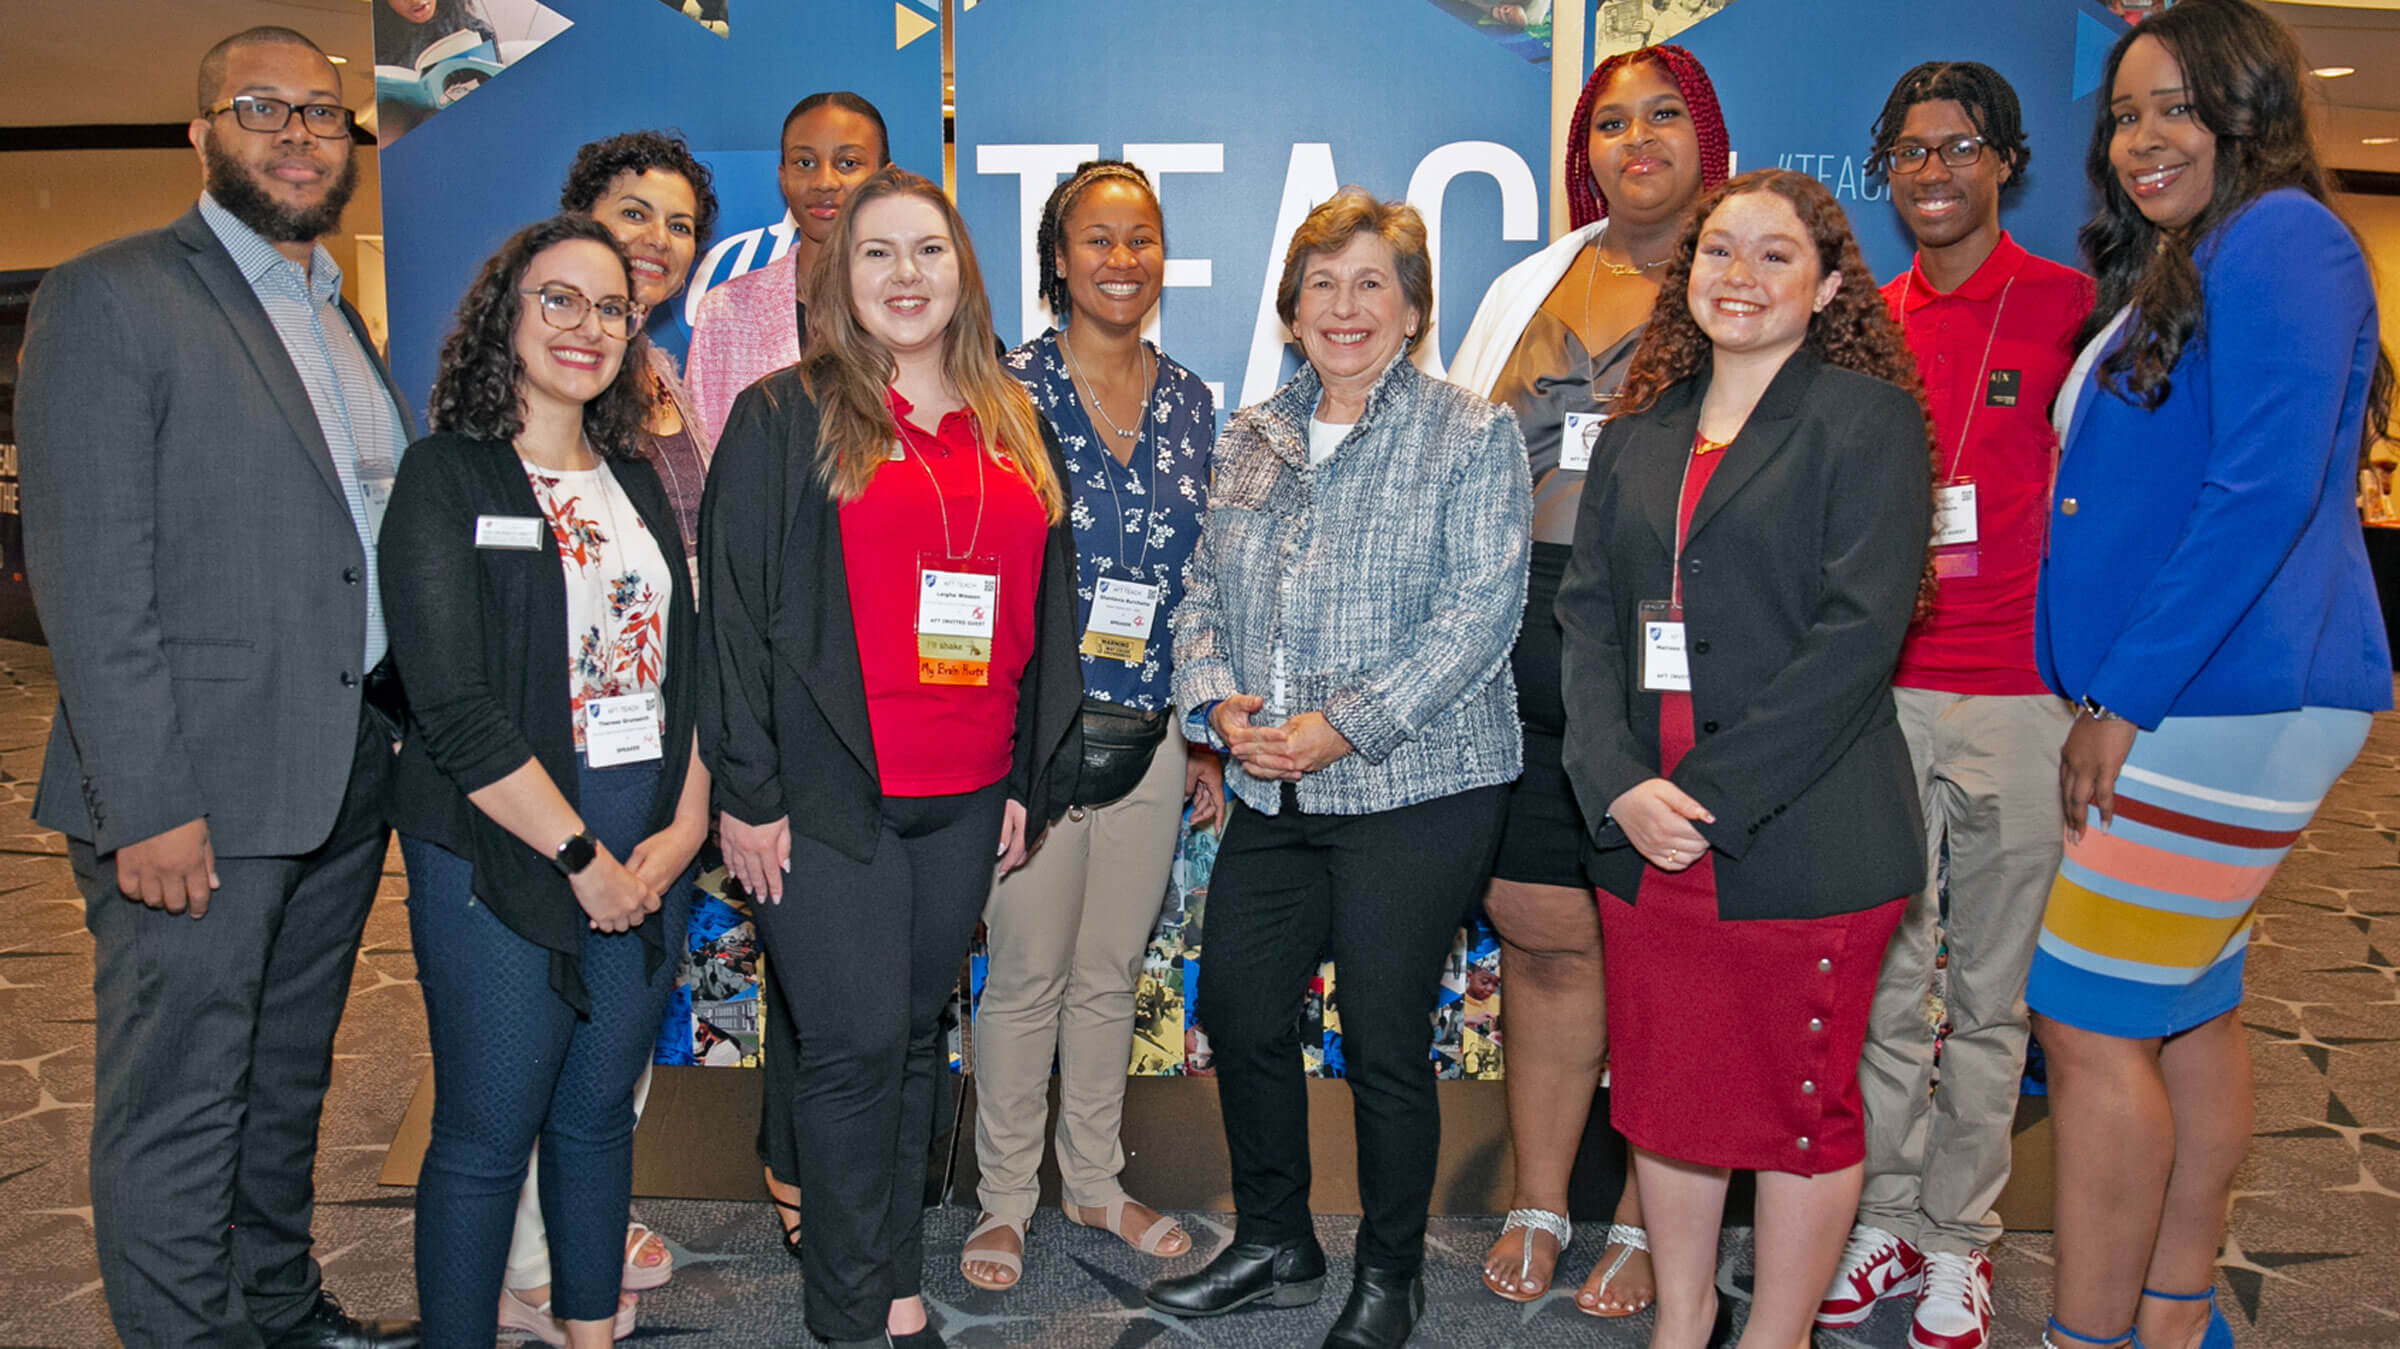 Weingarten, center, with students and educators attending the AFT’s TEACH conference in Washington, D.C., July 21.